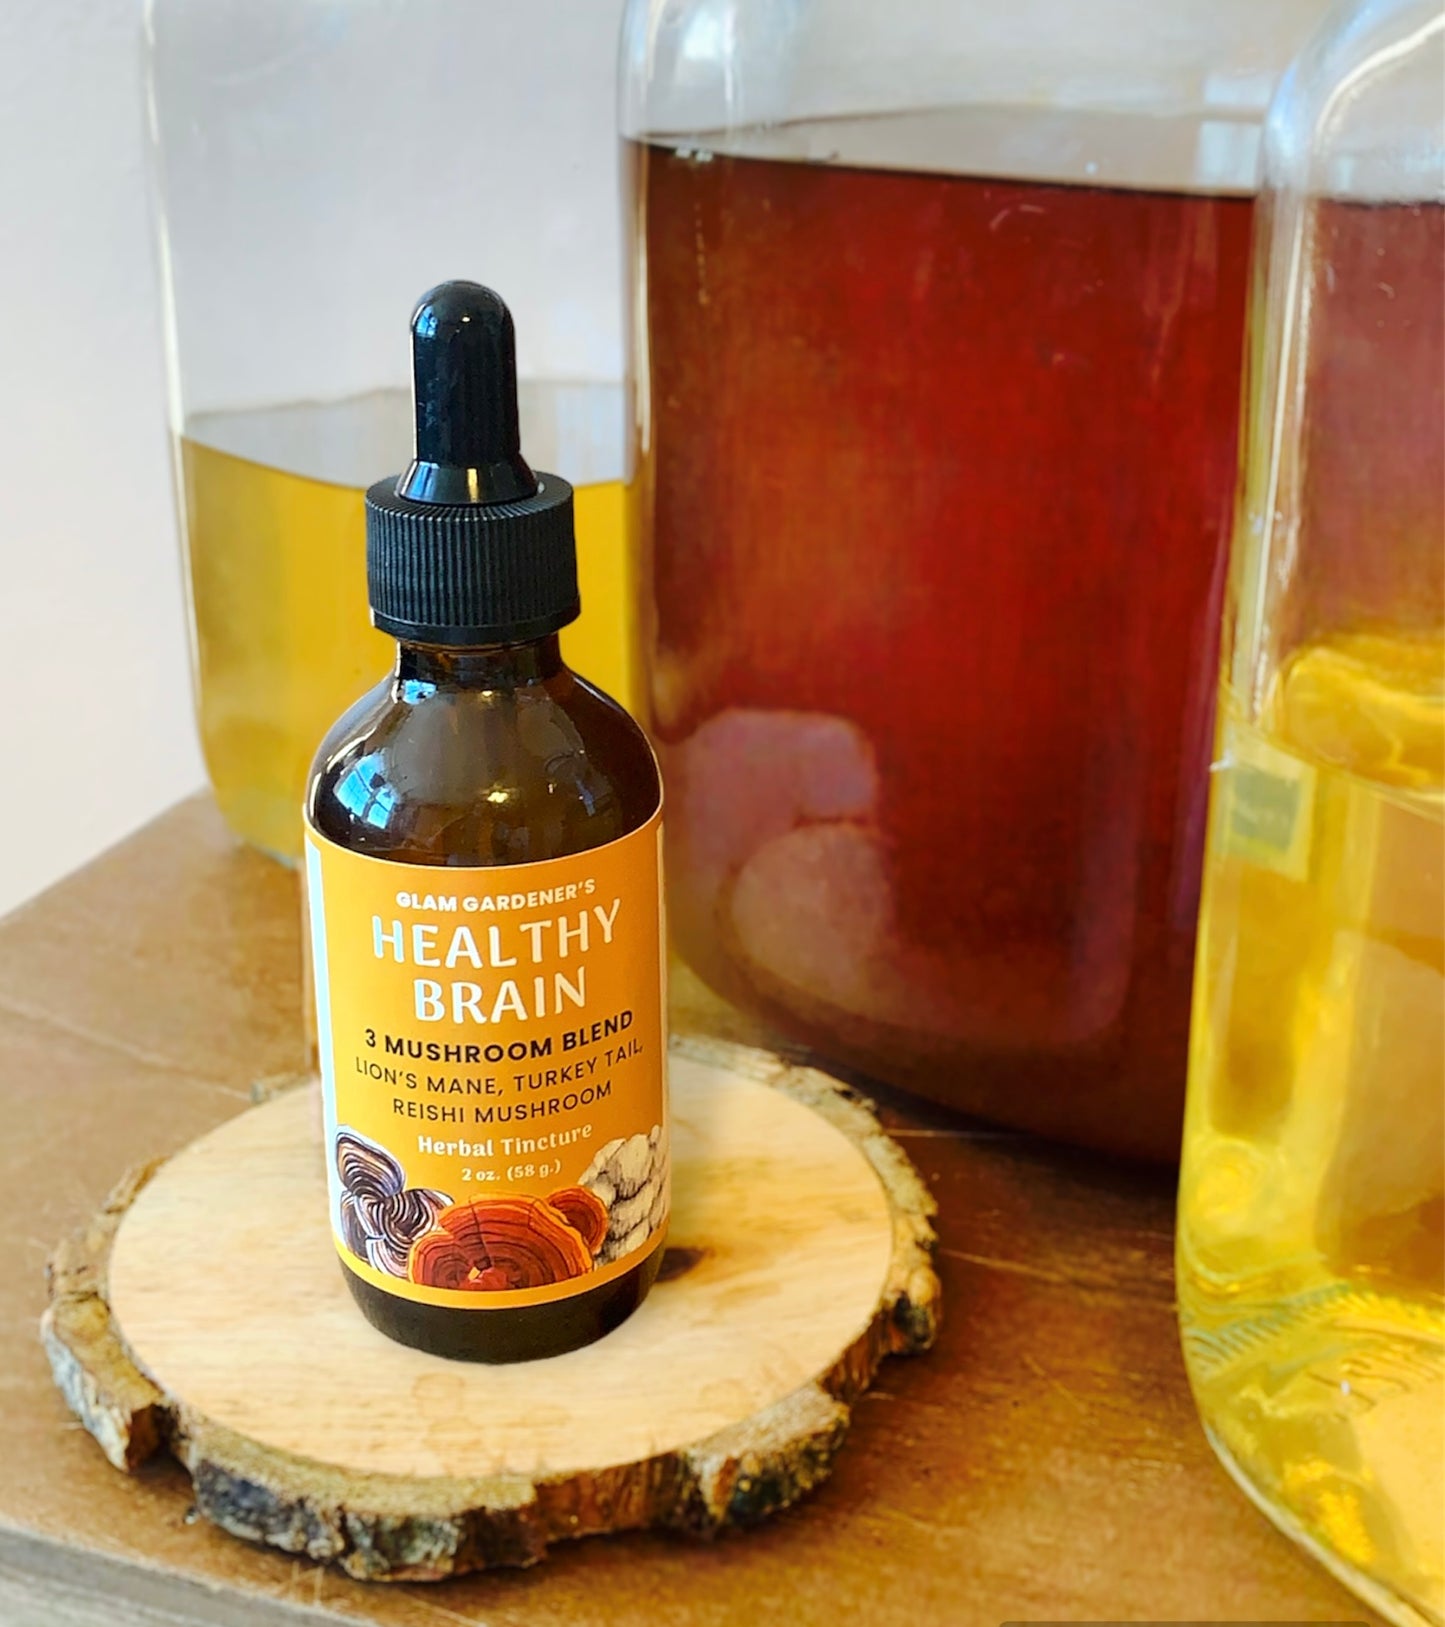 tincture with lion's mane turkey tail and reishi mushroom called healthy brain by glam gardener 